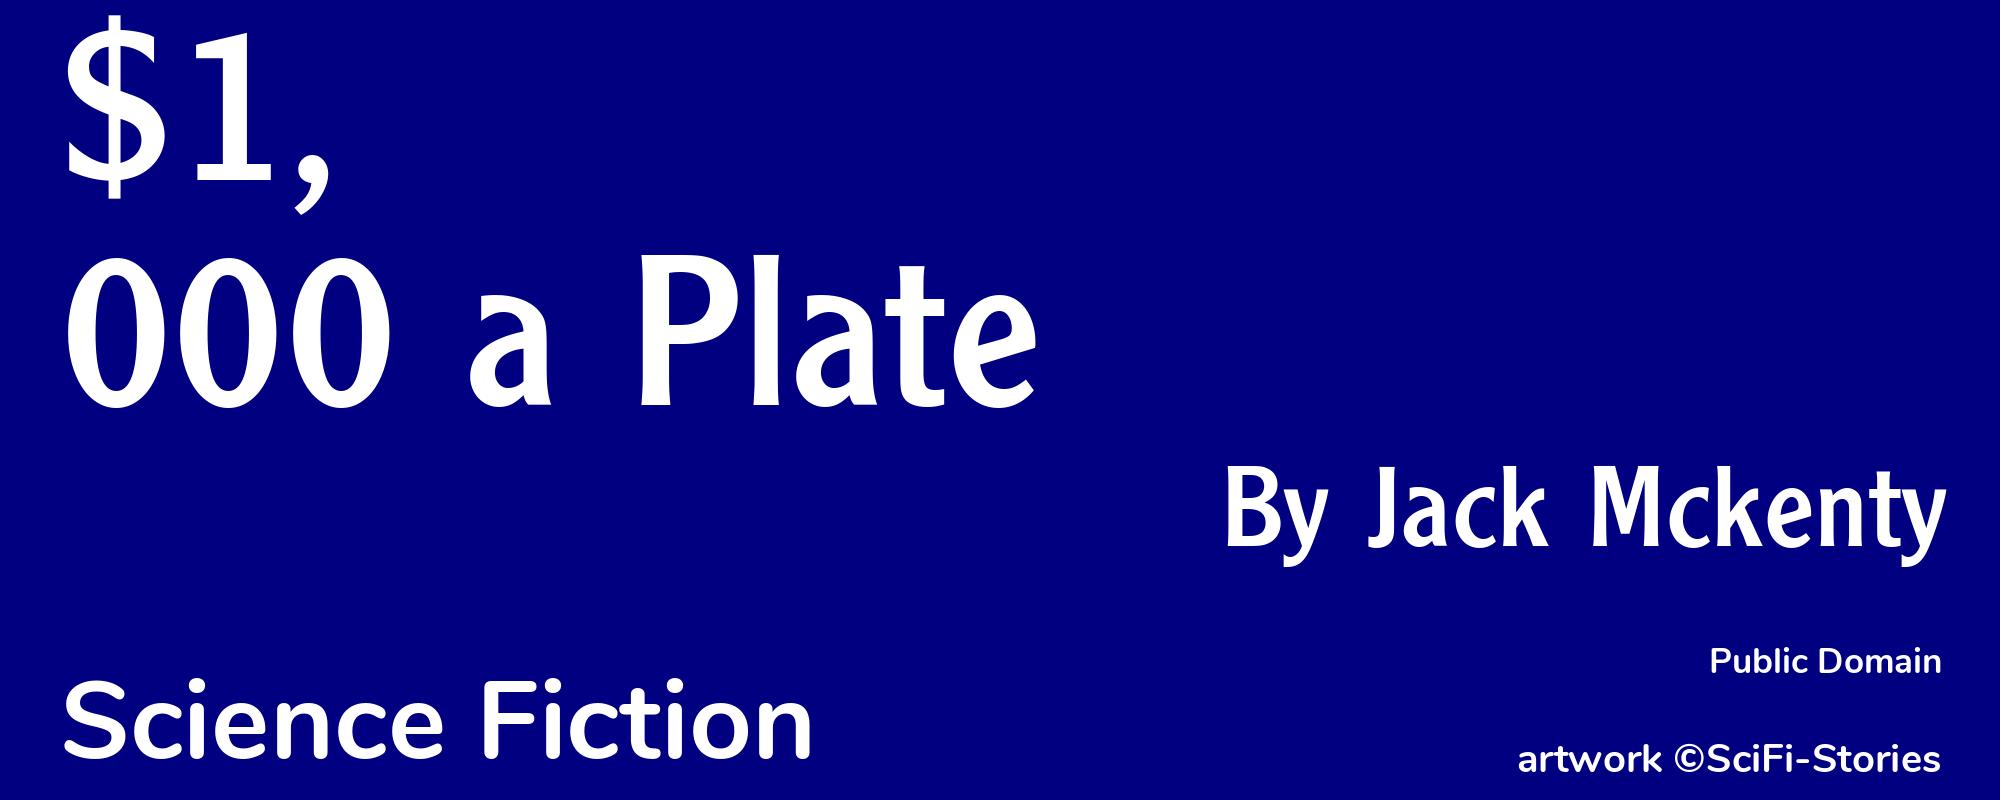 $1,000 a Plate - Cover